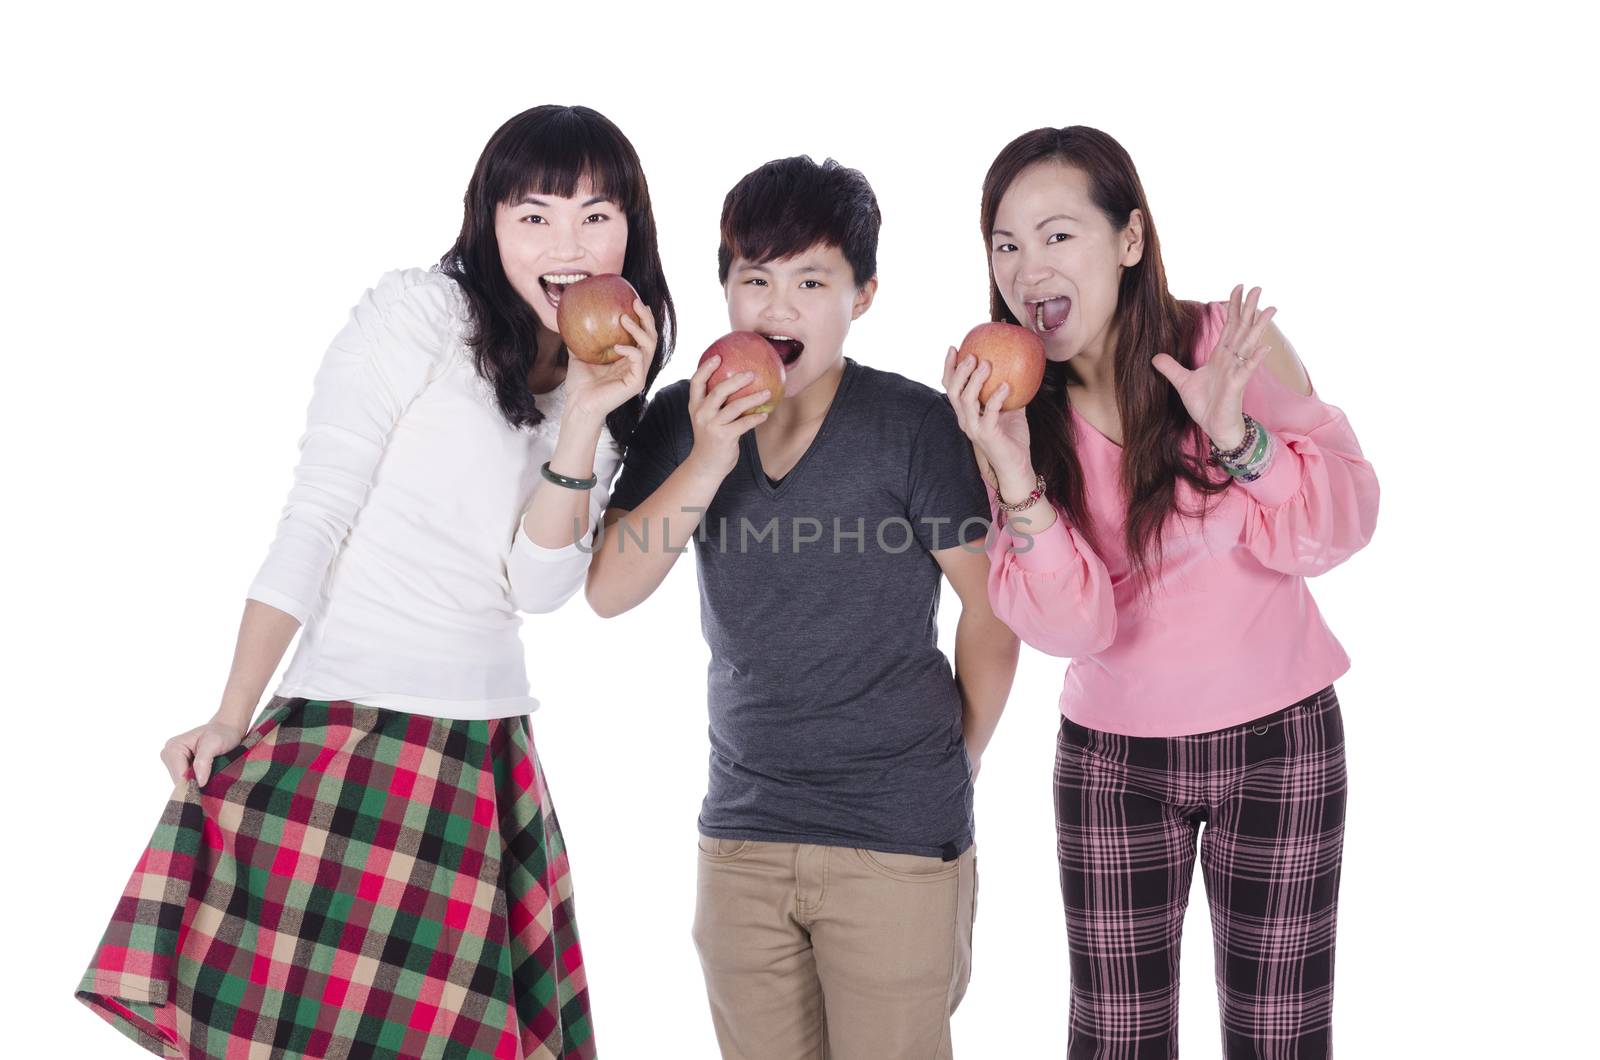 Pertty girls eating apples over white background